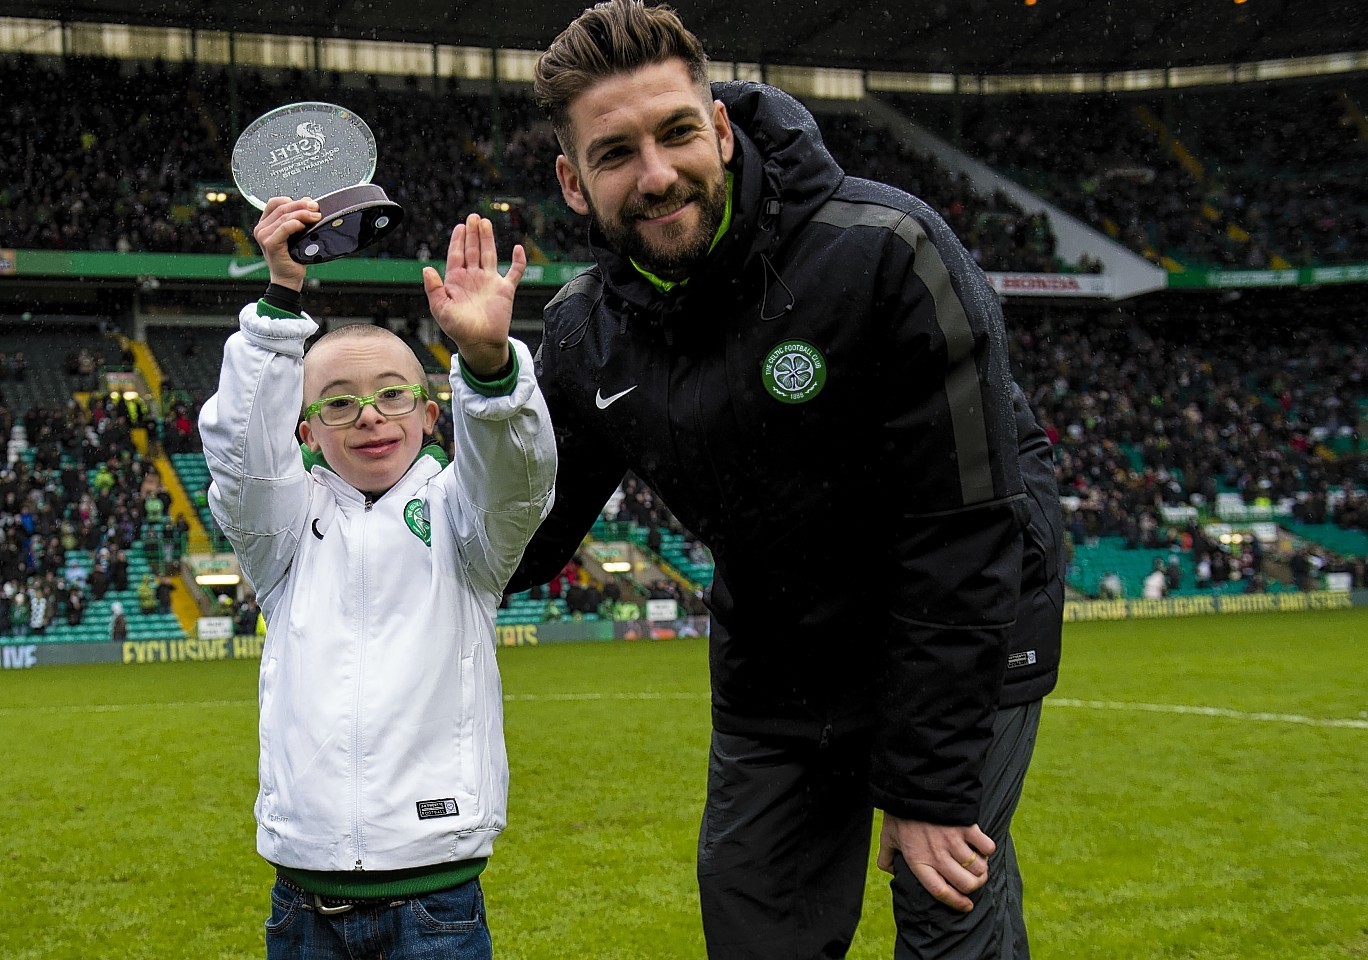 Jay receives his goal of the month award from Celtic's Charlie Mulgrew